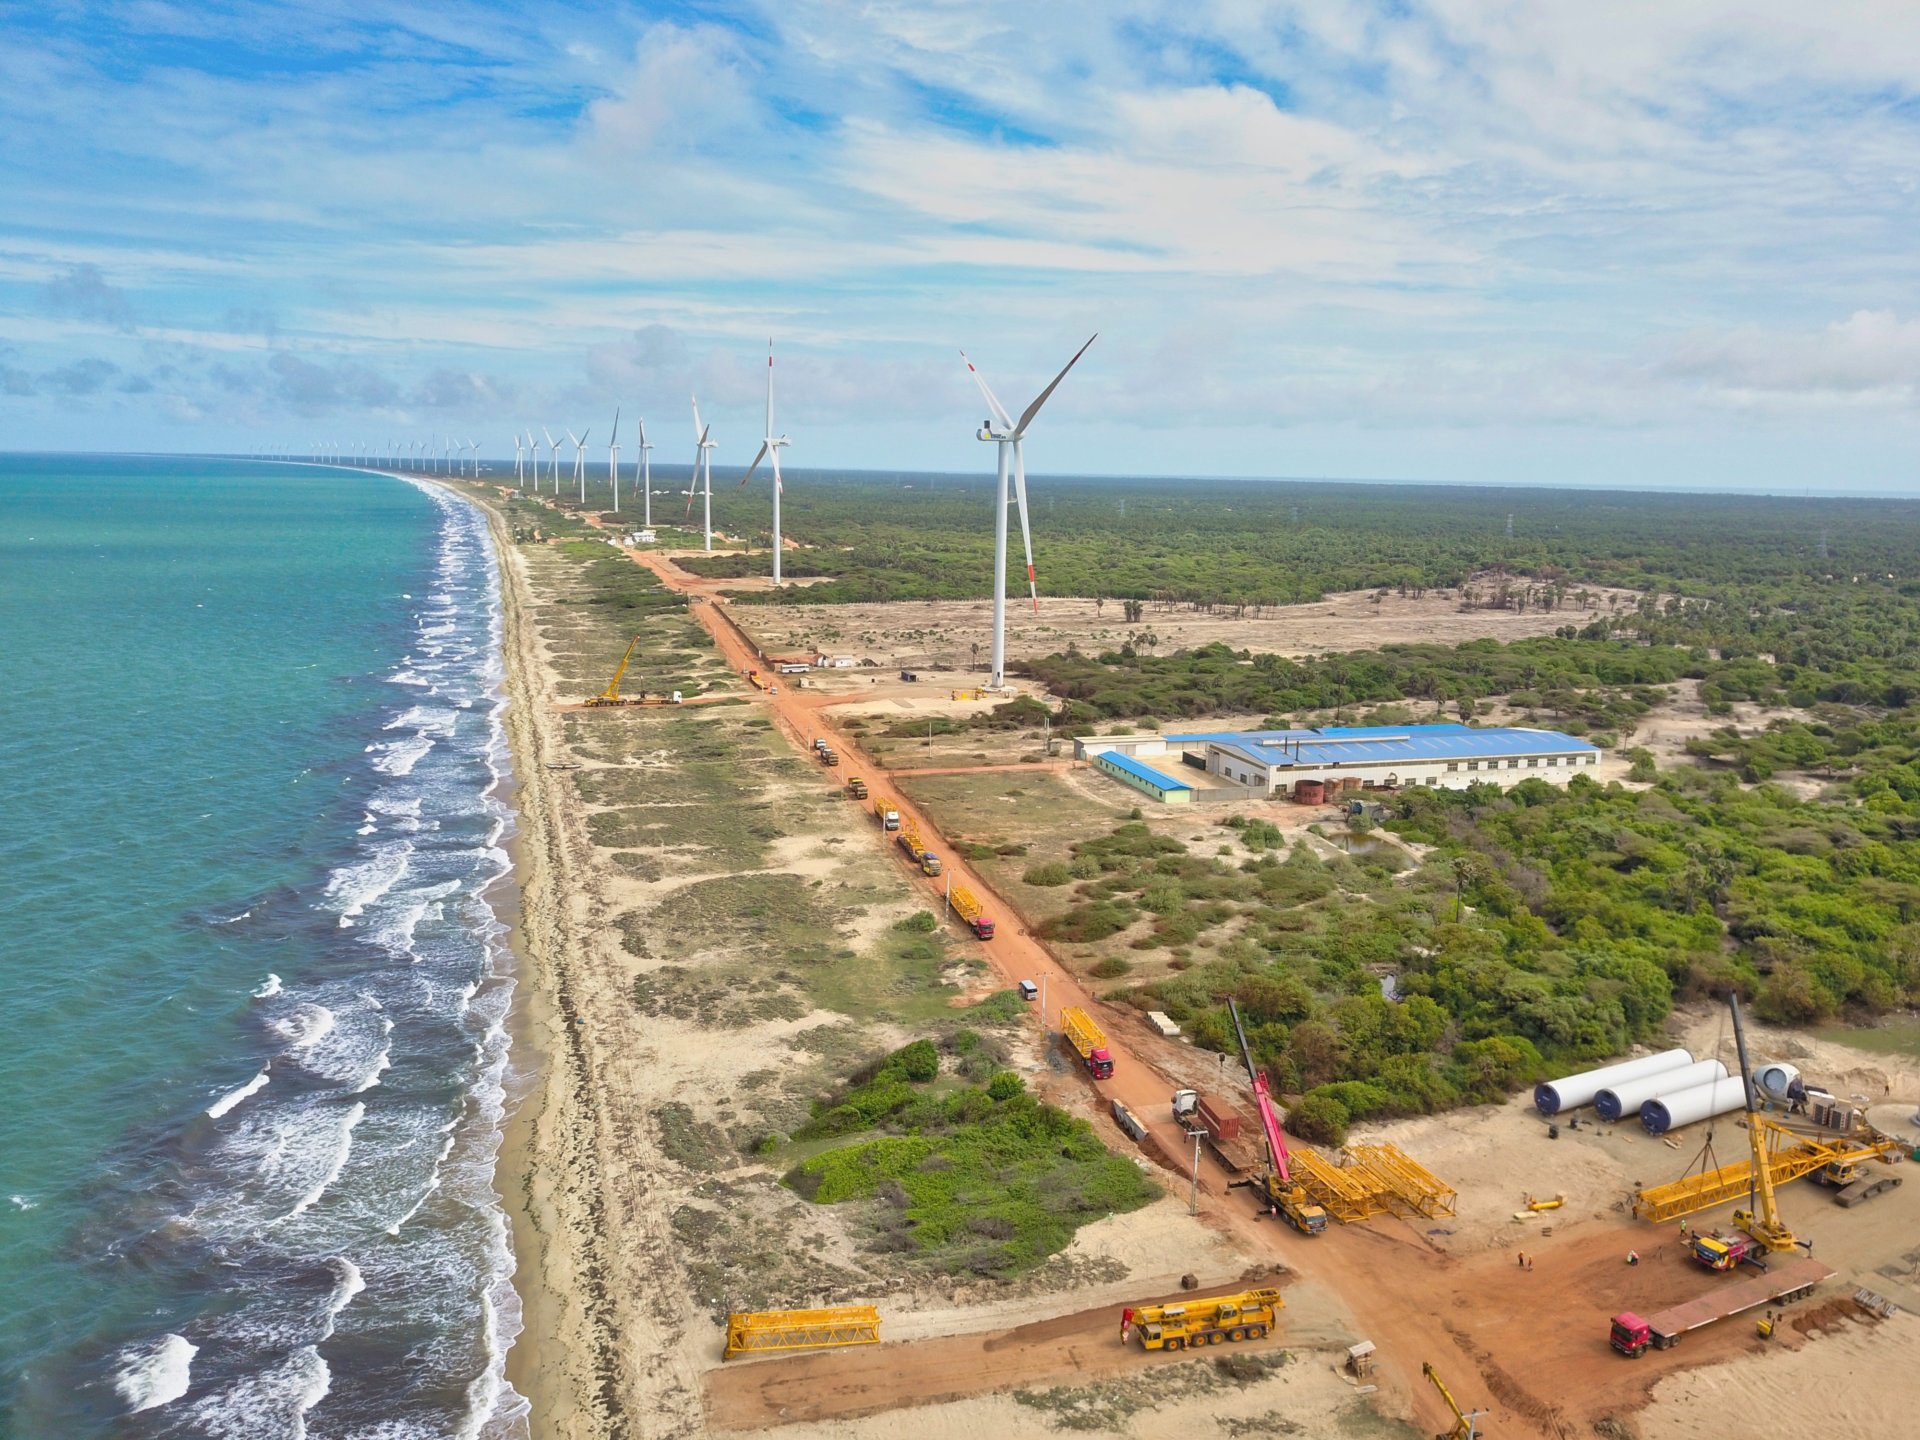 Thambapavani Wind Farm on Mannar Island, Sri Lanka, a project funded with assistance from the Asian Development Bank, a Multinational Development Bank, ahead of COP26. Image via Accessing Engineering